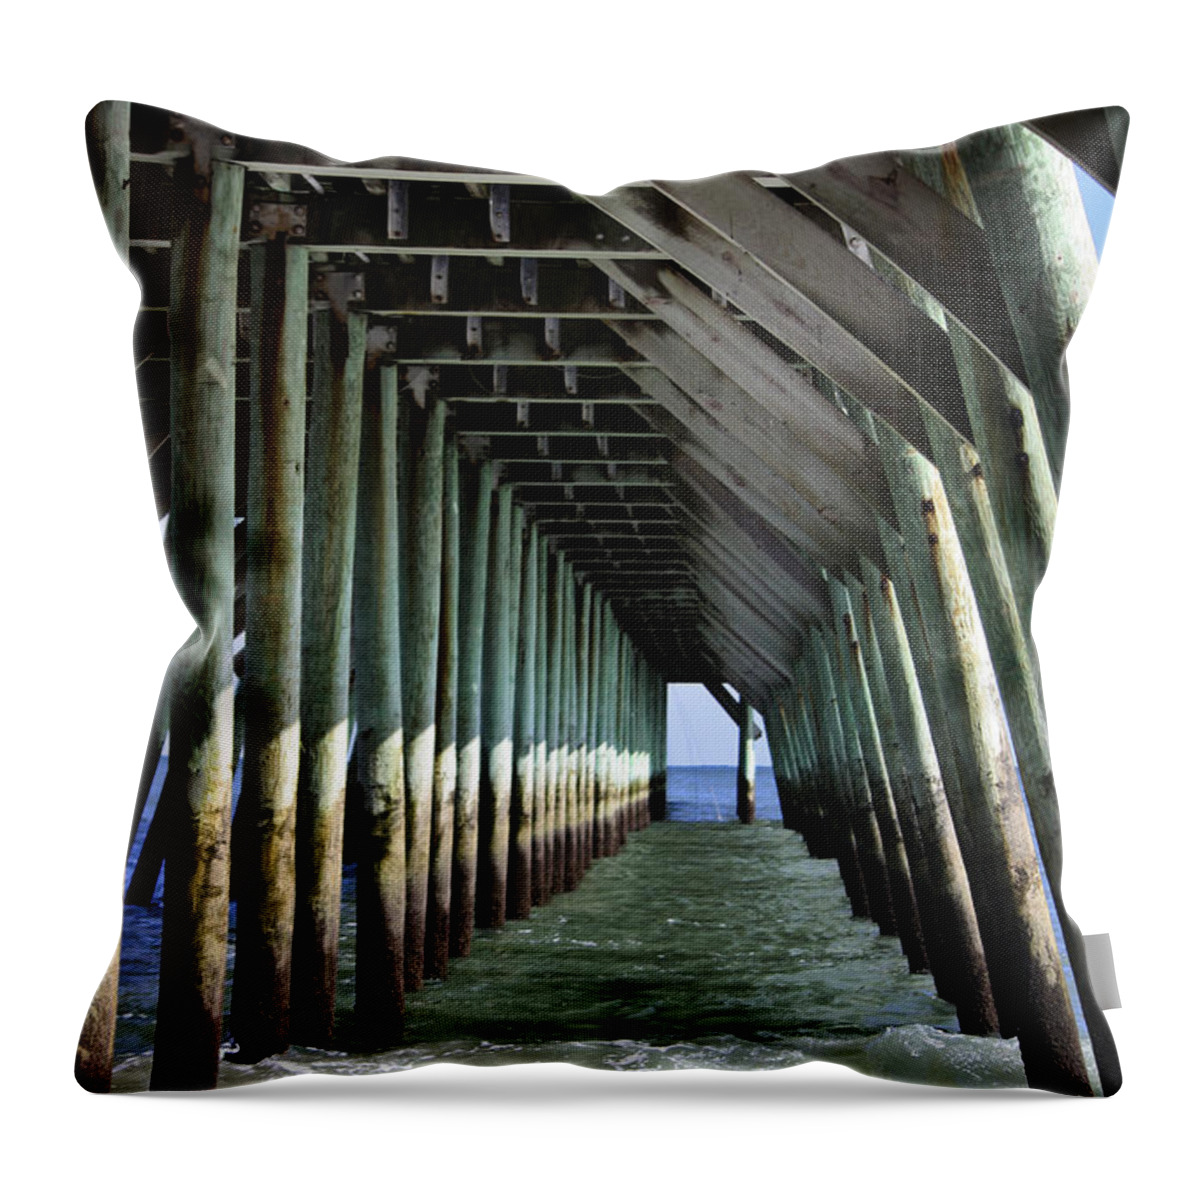 Sunlight Throw Pillow featuring the photograph Under the Pier by Teresa Mucha